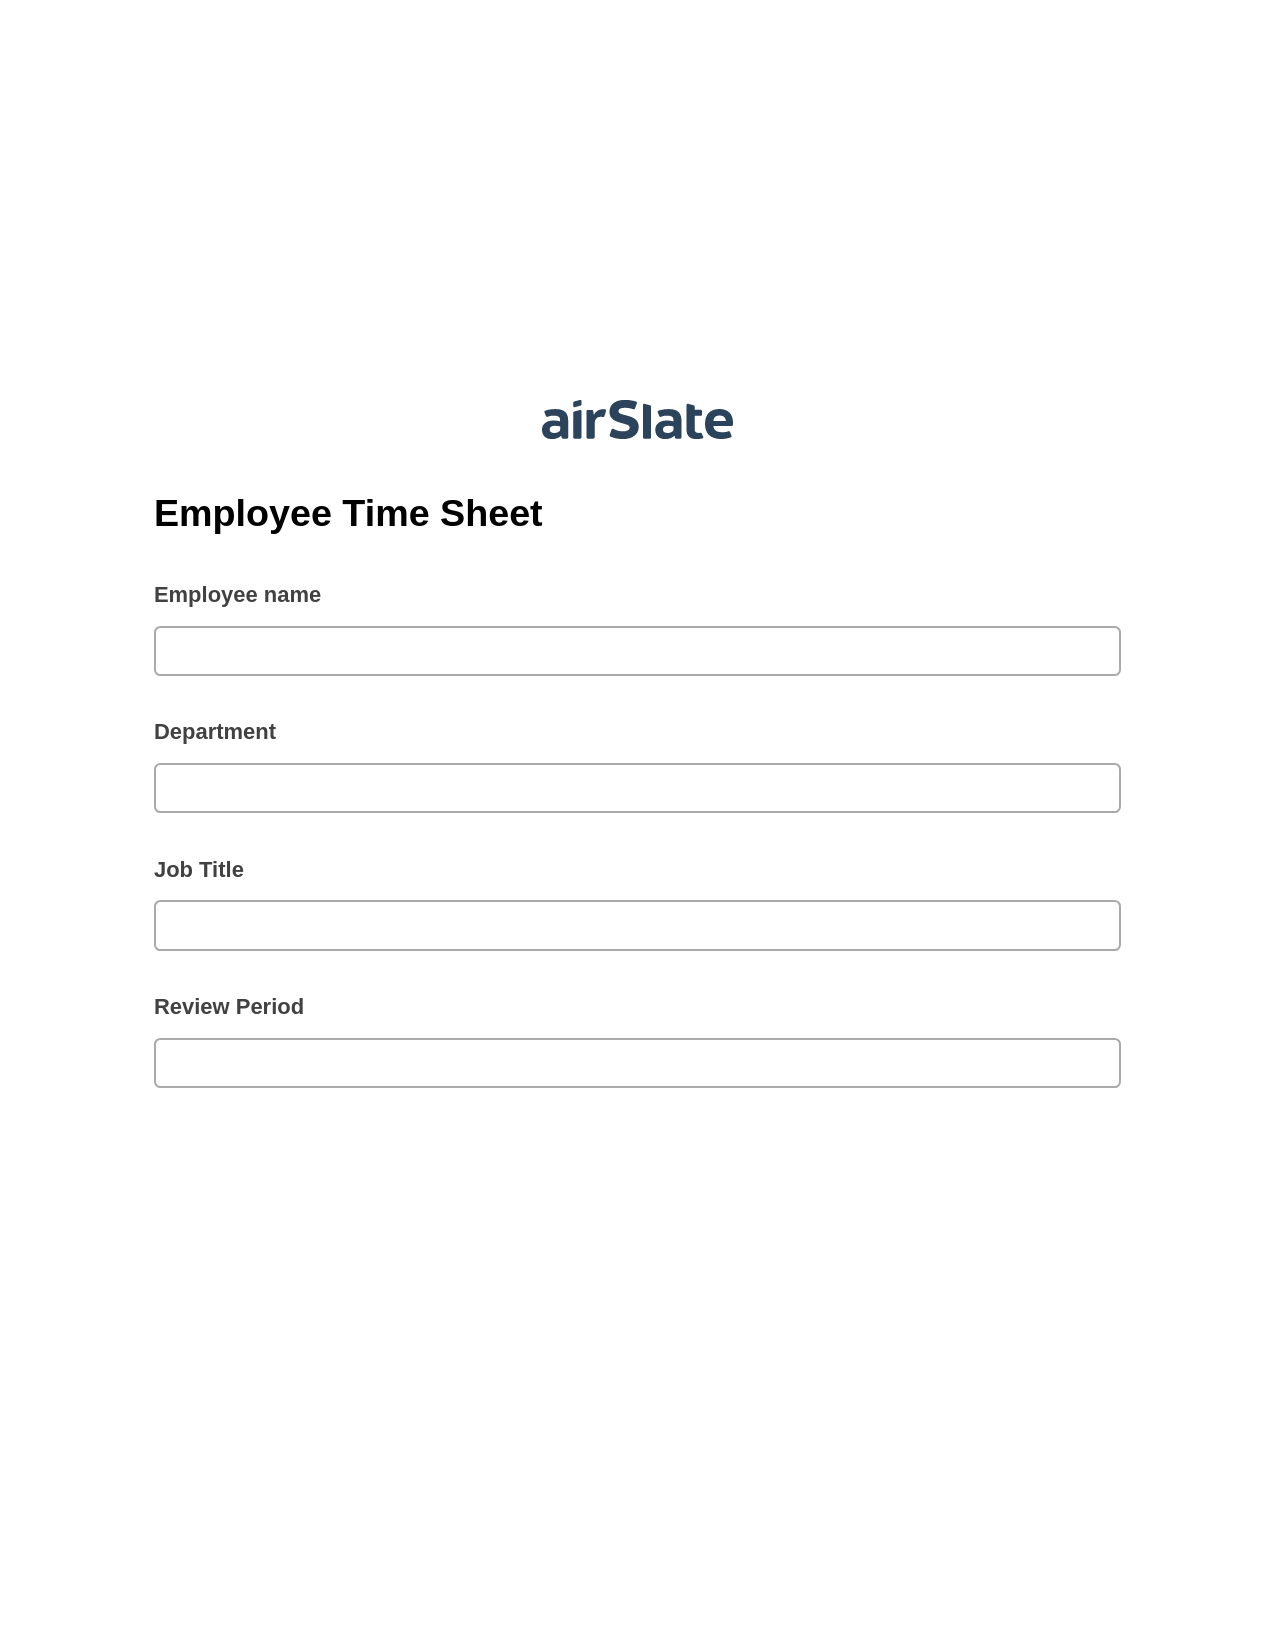 Multirole Employee Time Sheet Pre-fill from Office 365 Excel Bot, Create slate addon, Export to NetSuite Bot